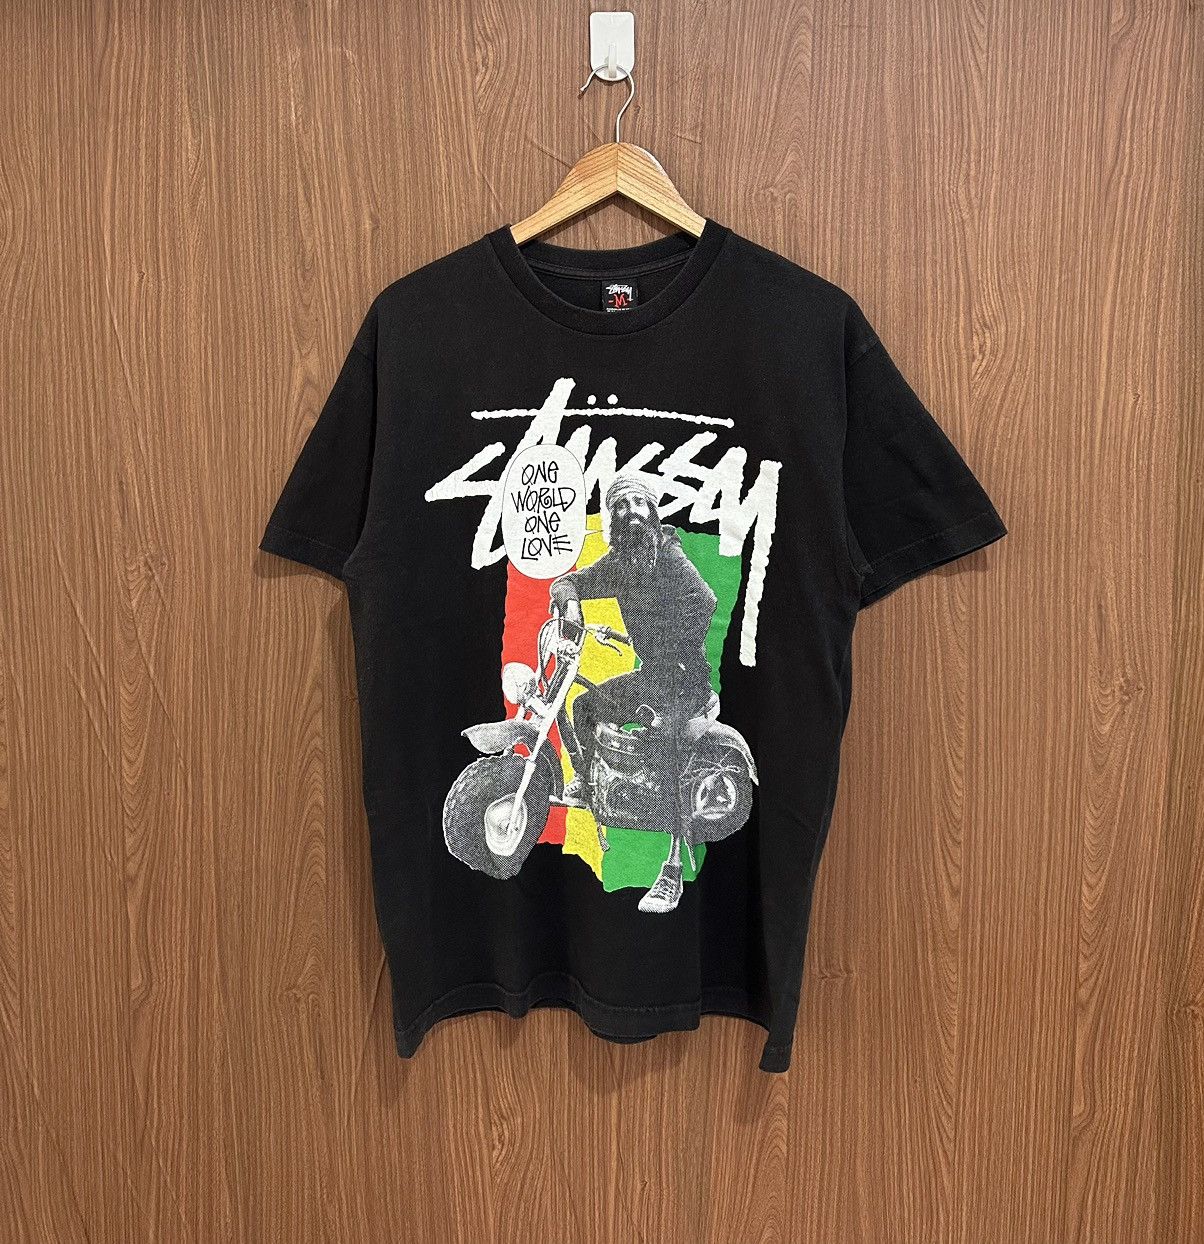 One World One Love Stussy | Grailed